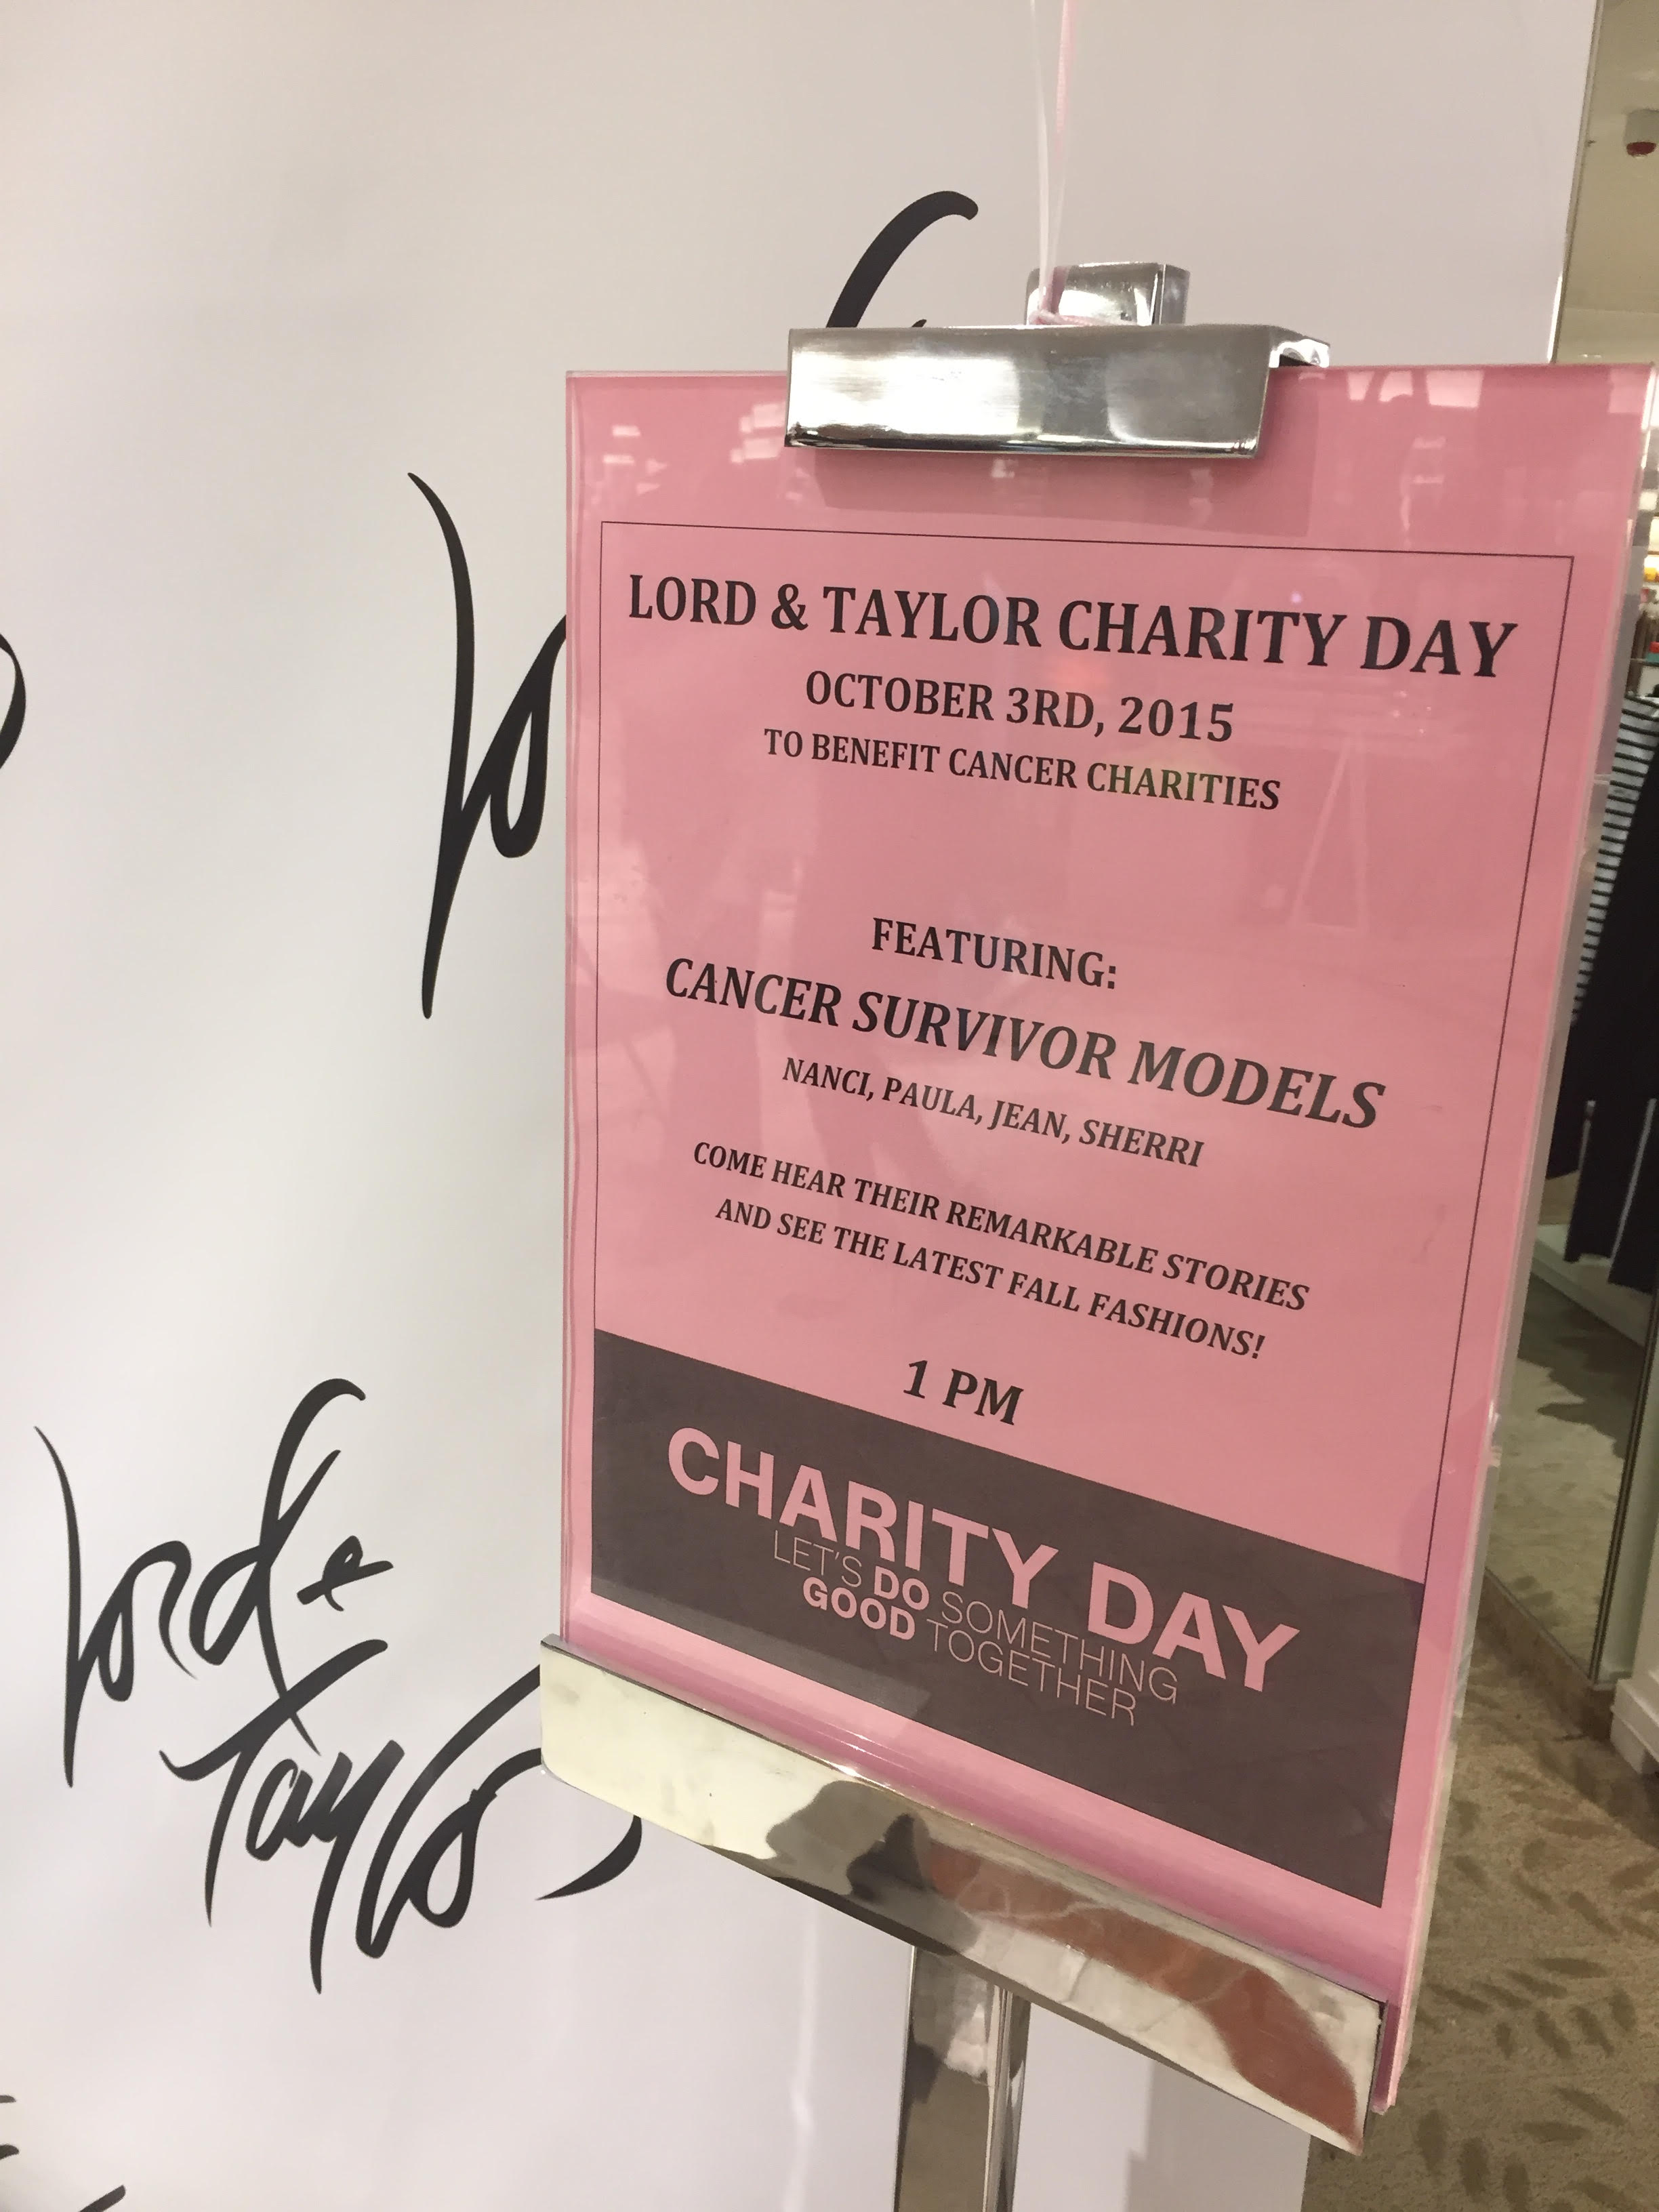 Lord & Taylor Charity Day, September 2015